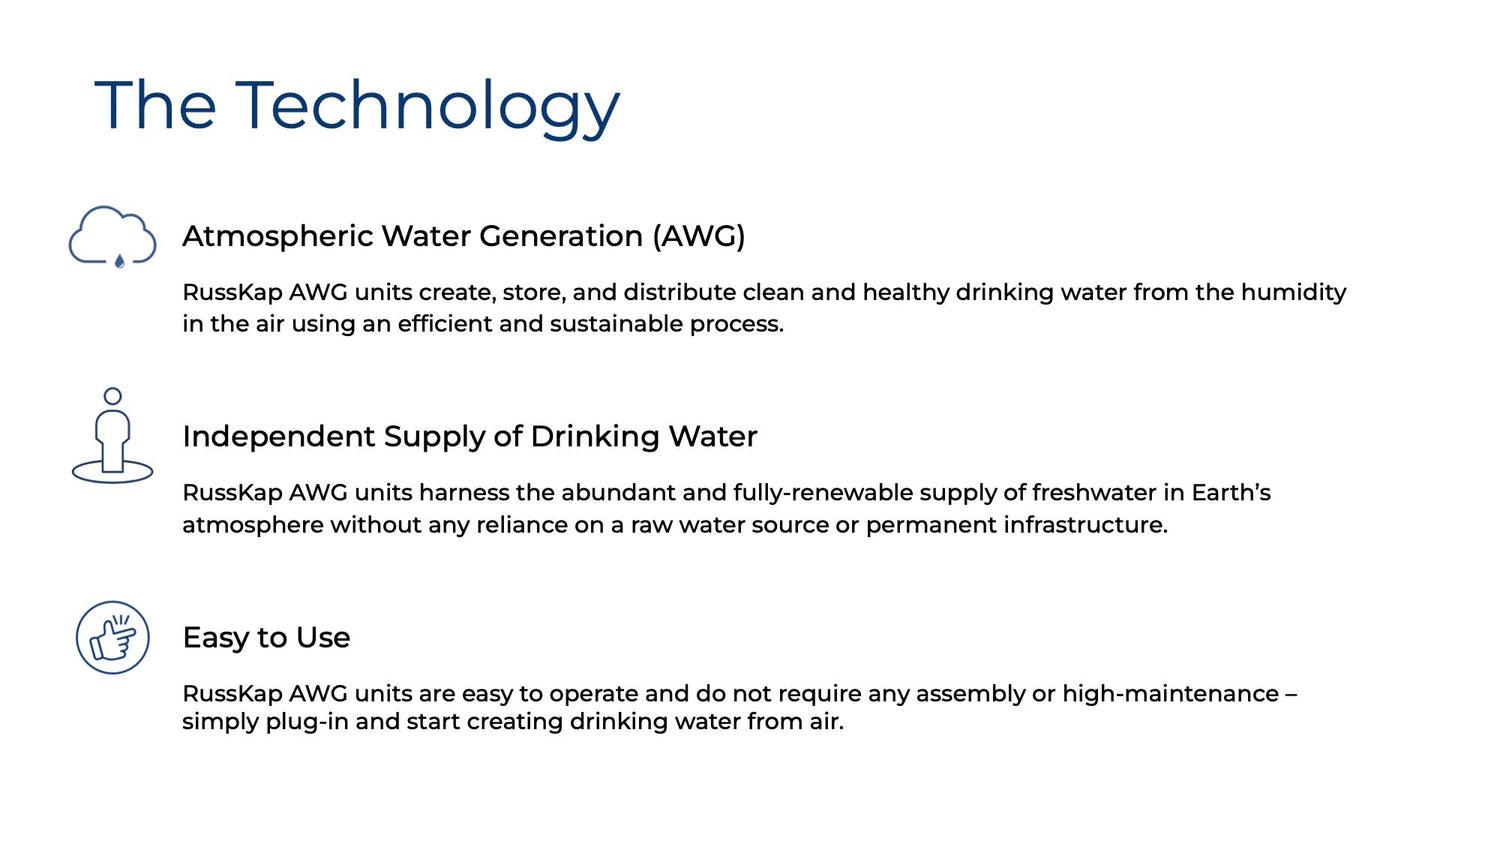 The Technology: RussKap Atmospheric Water Generation (AWG) provides an independent supply of drinking water that's easy to use.